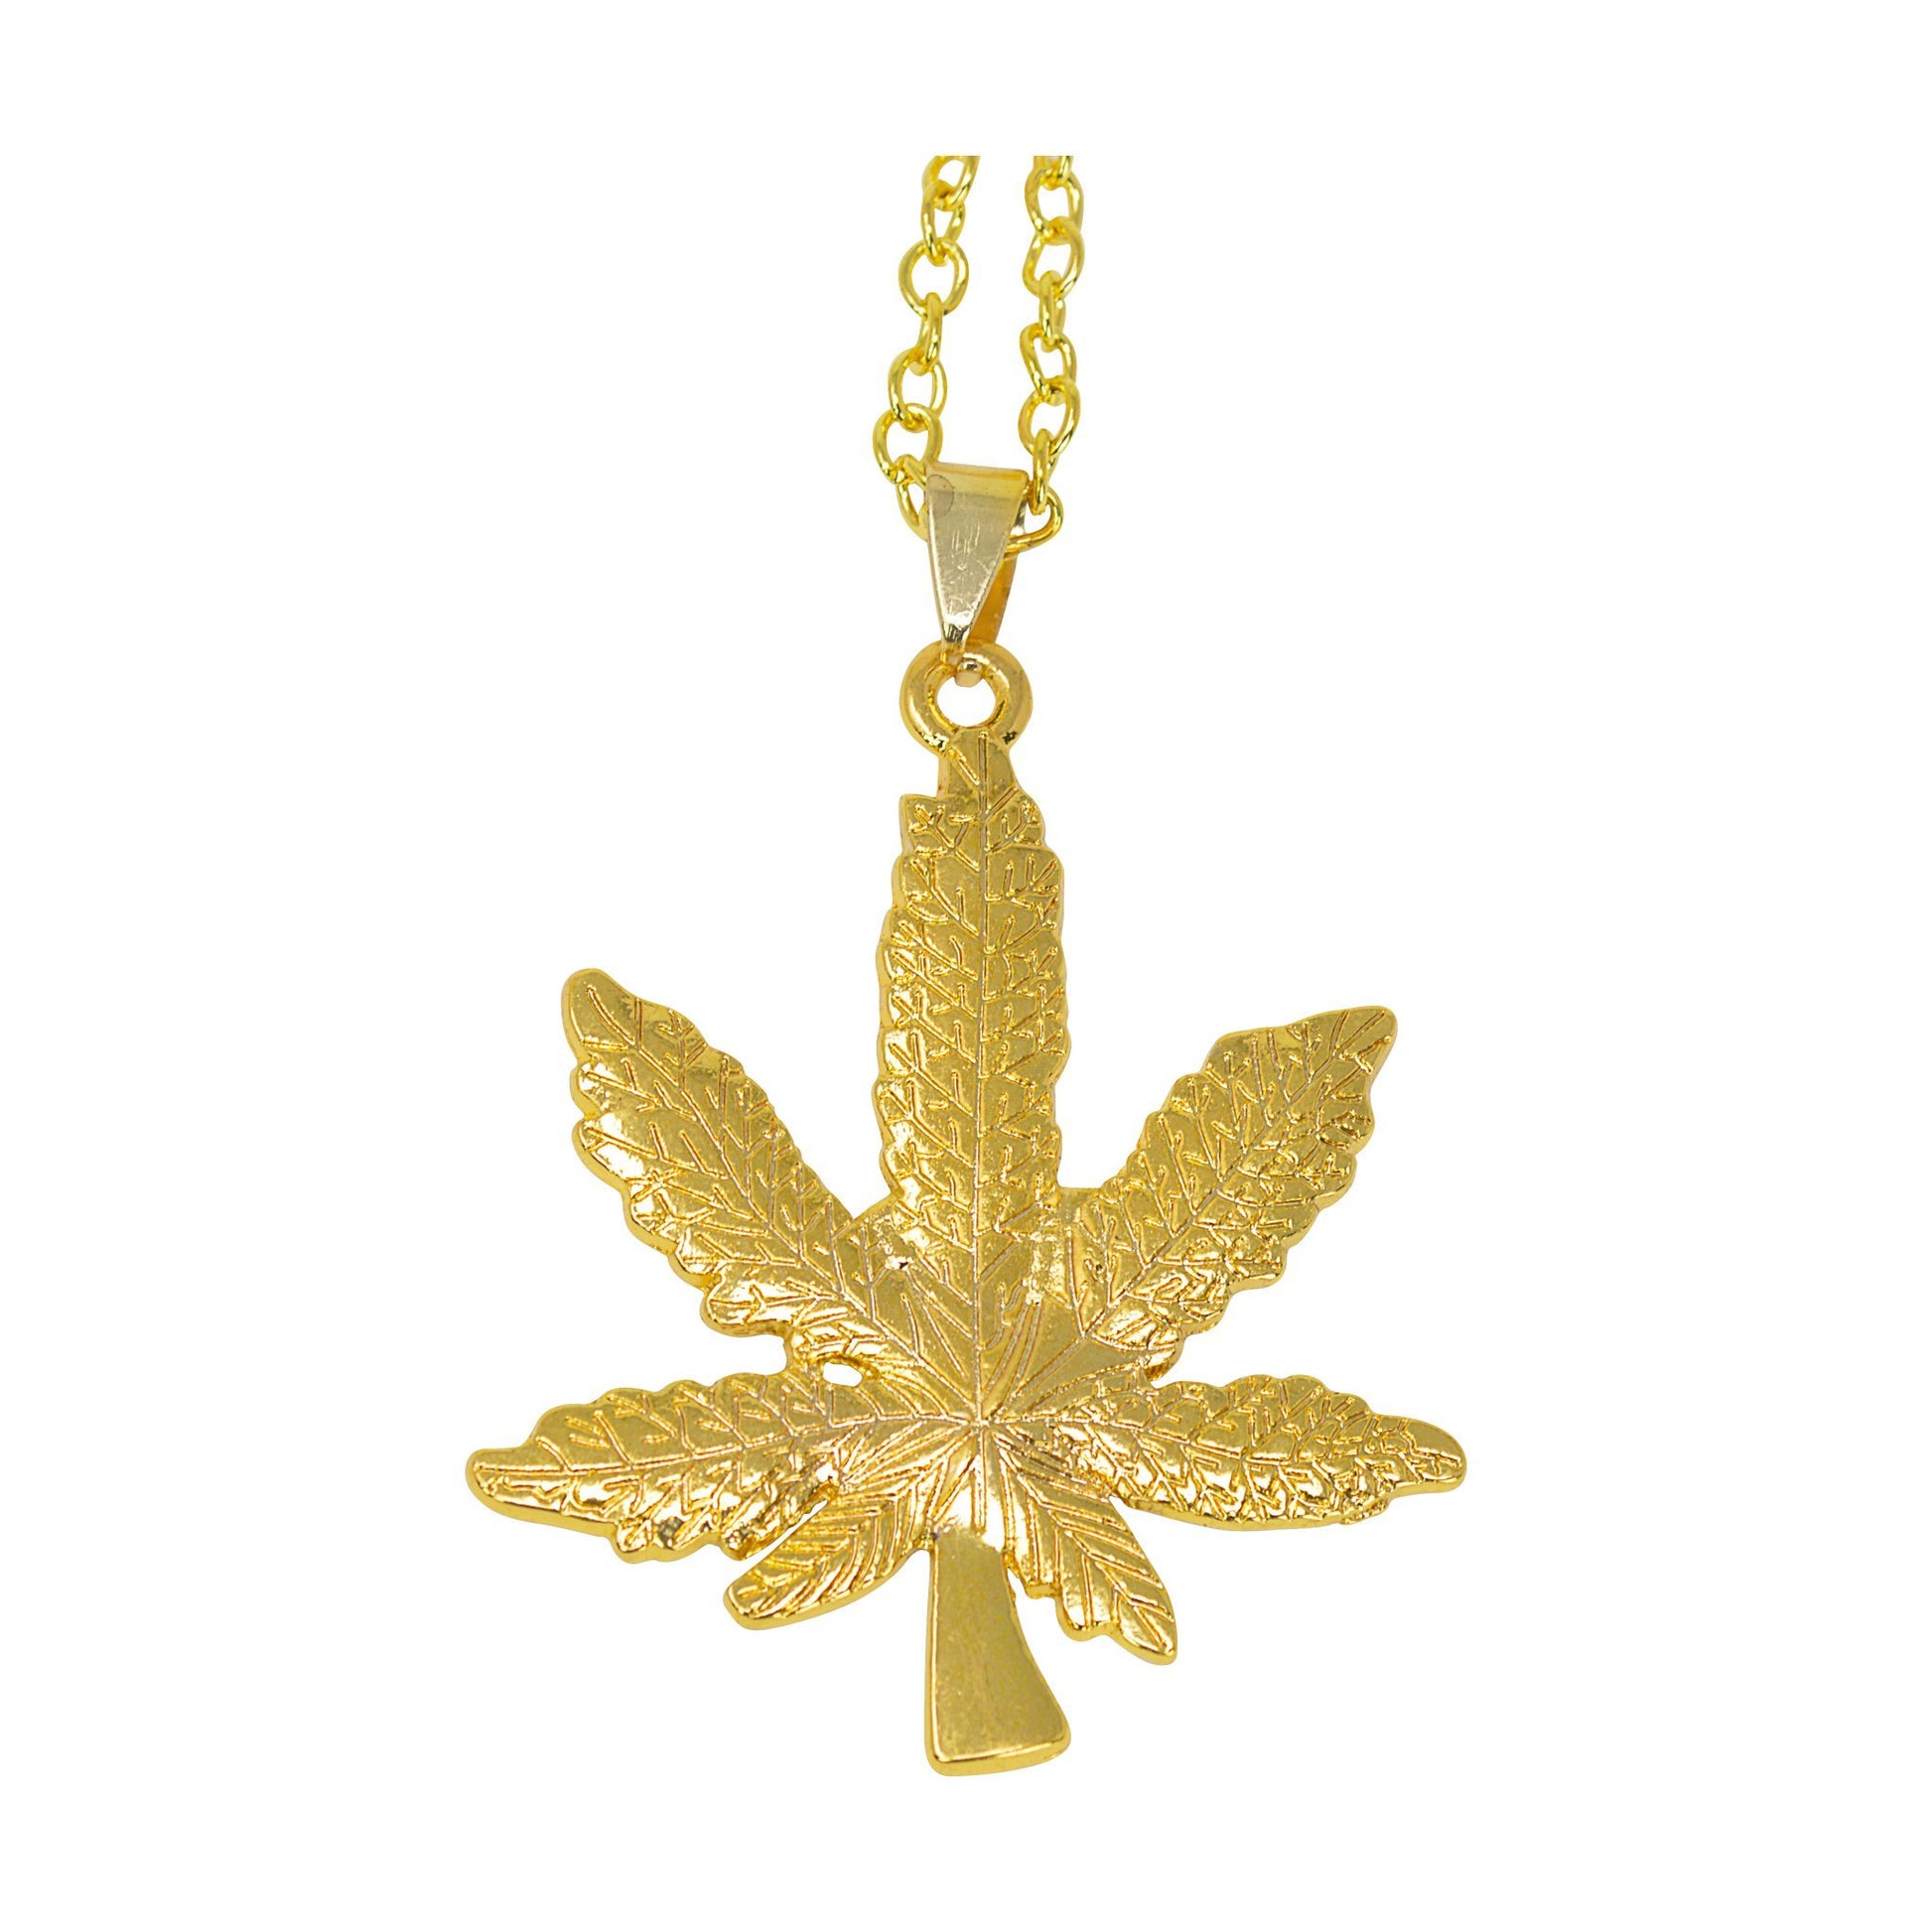 Gold stylish party necklace fashion item fashion accessory in a weed pot design with a chain and weed leaf pendant